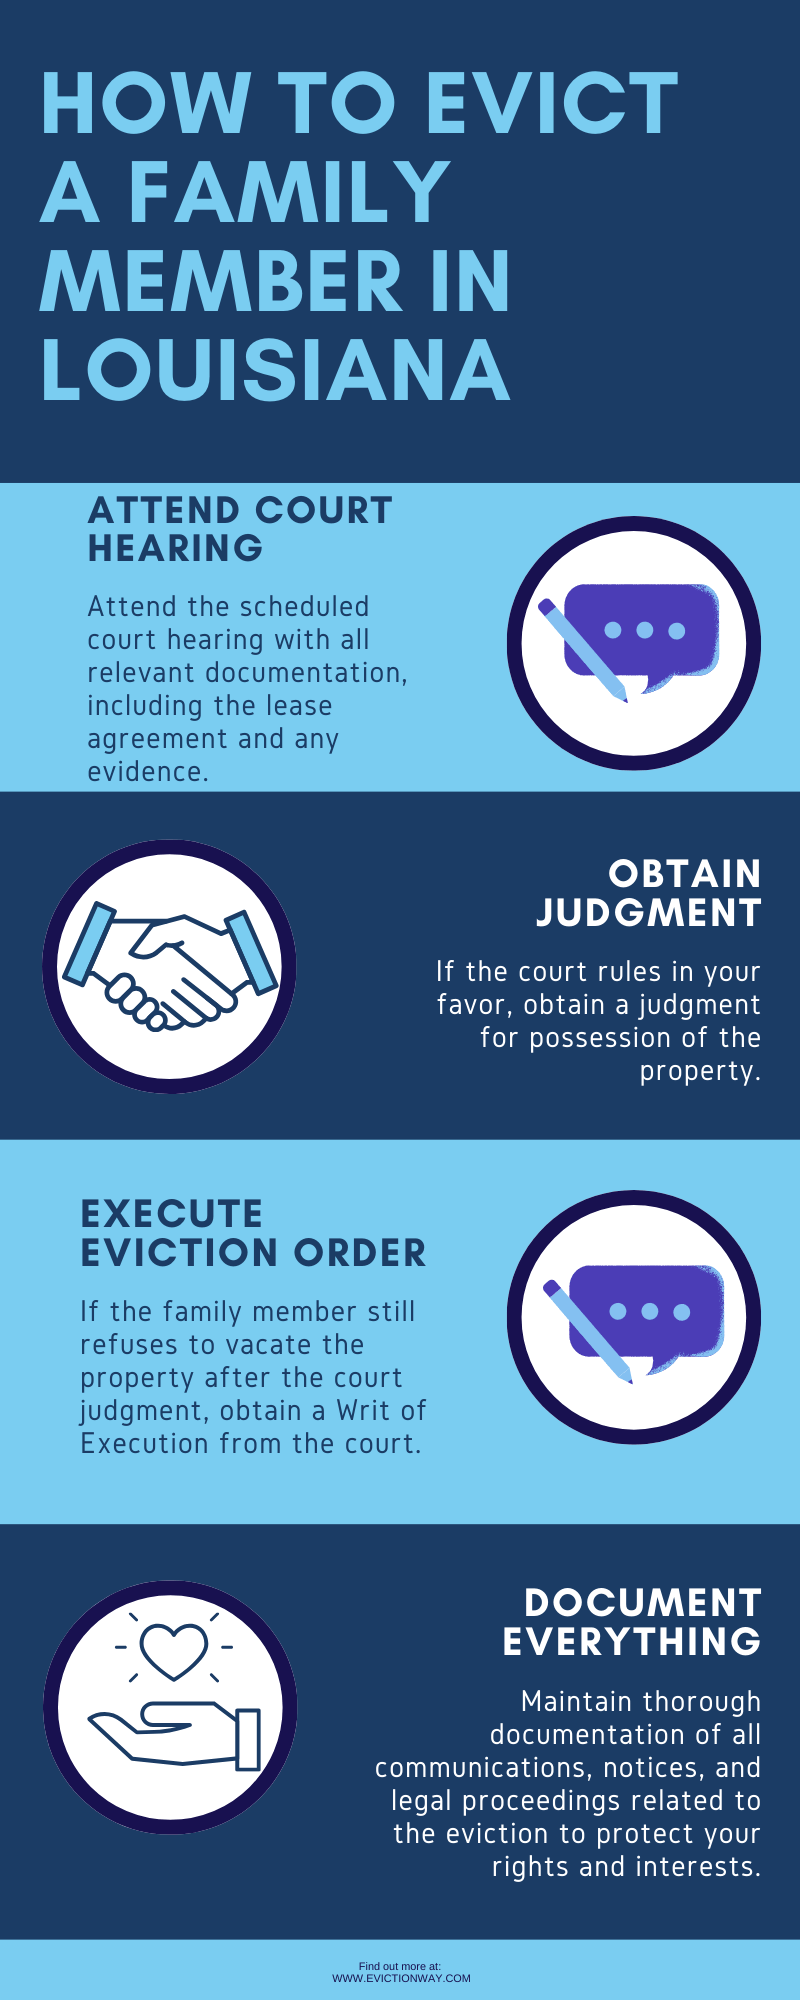 How to Evict a Family Member in Louisiana